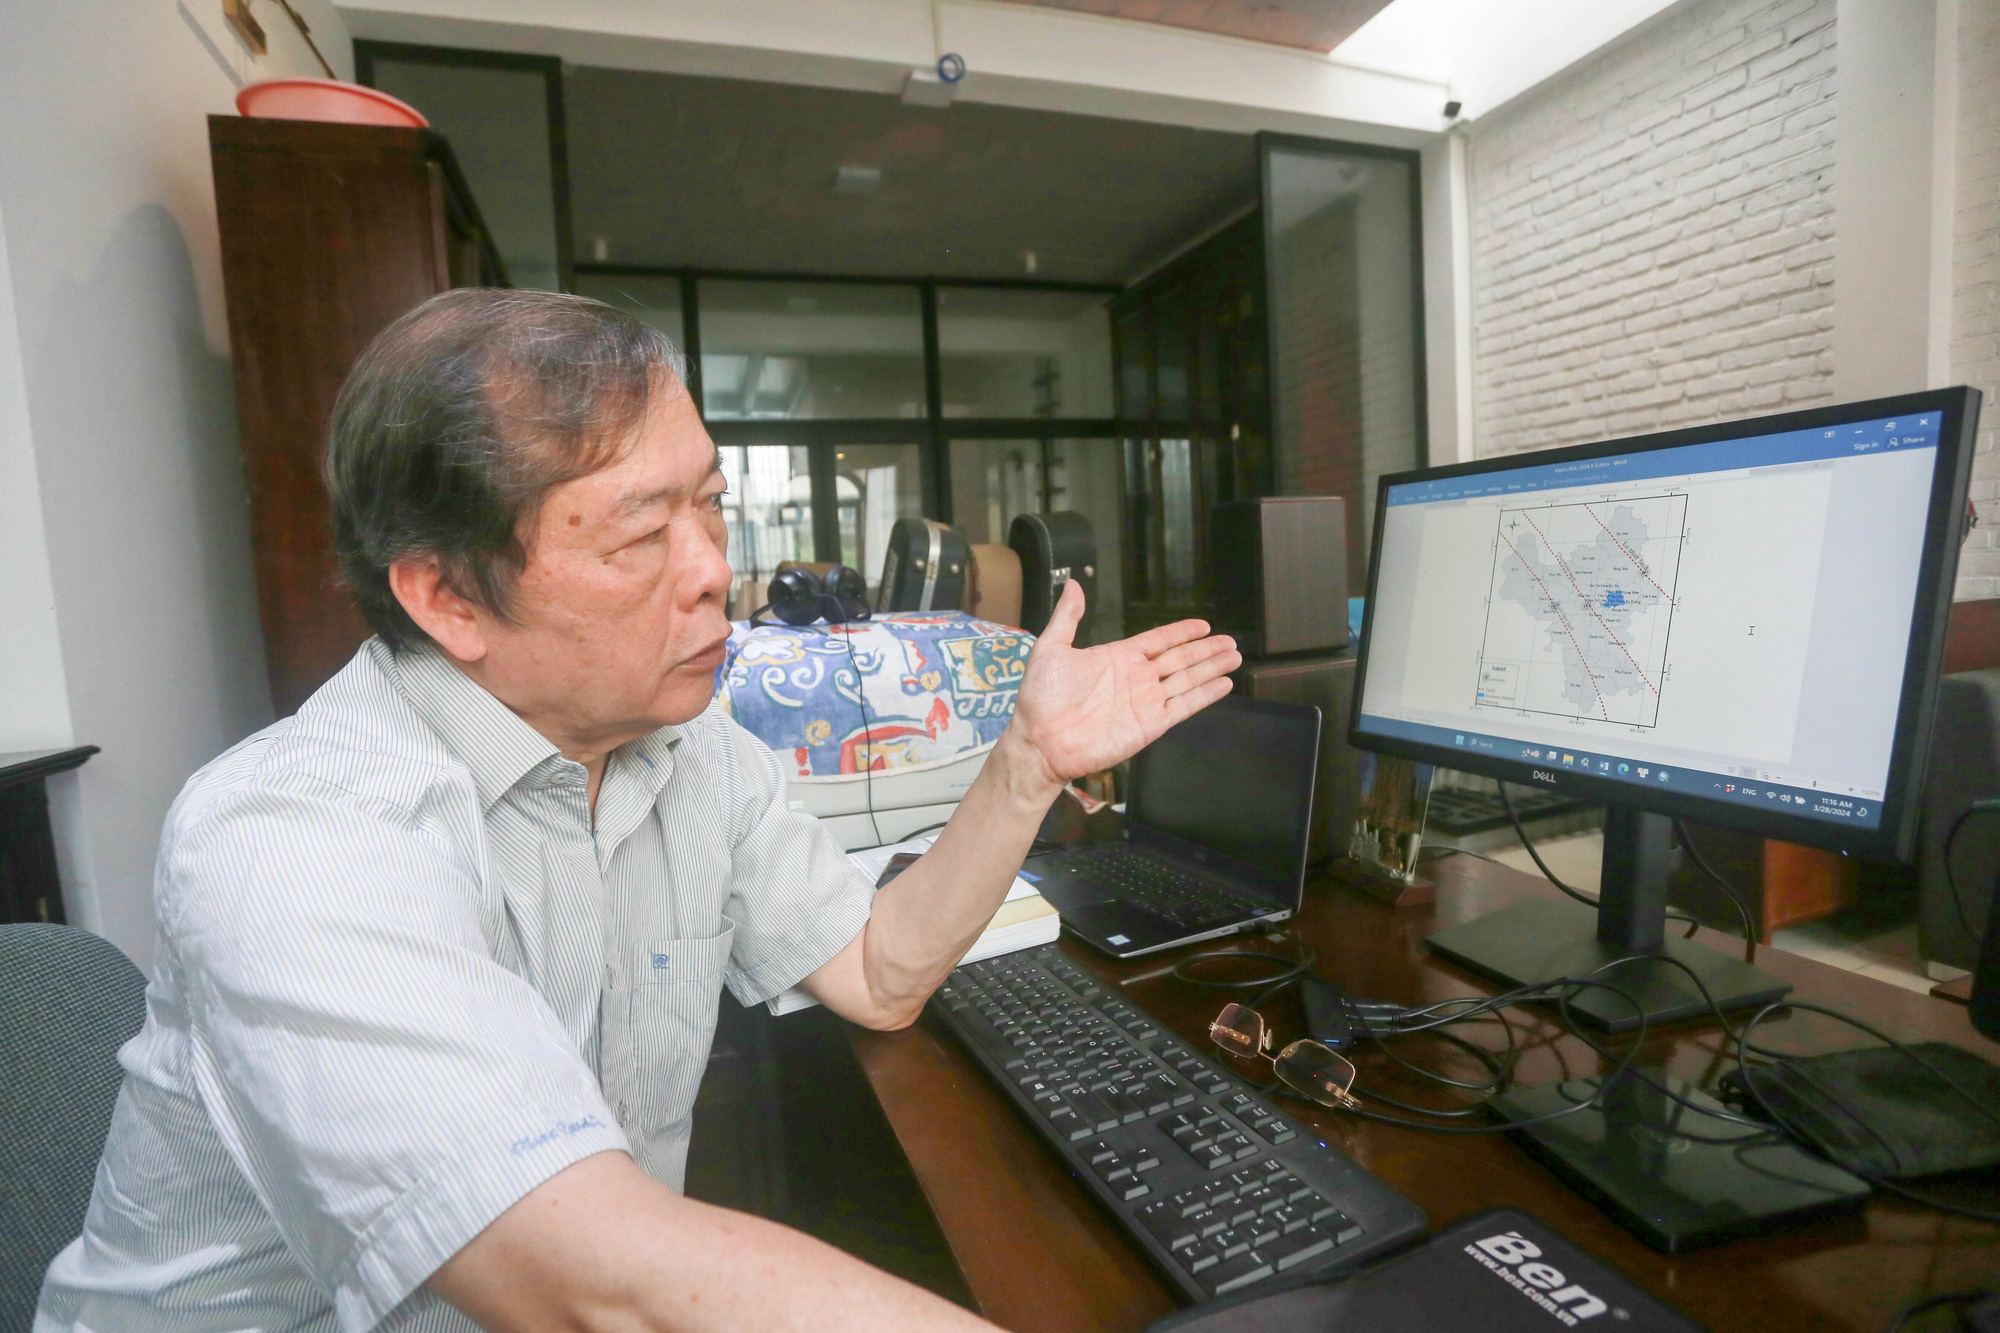 Assoc. Prof. Dr. Nguyen Hong Phuong, chairman of the Scientific Council at the Institute of Geophysics under the Vietnam Academy of Science and Technology